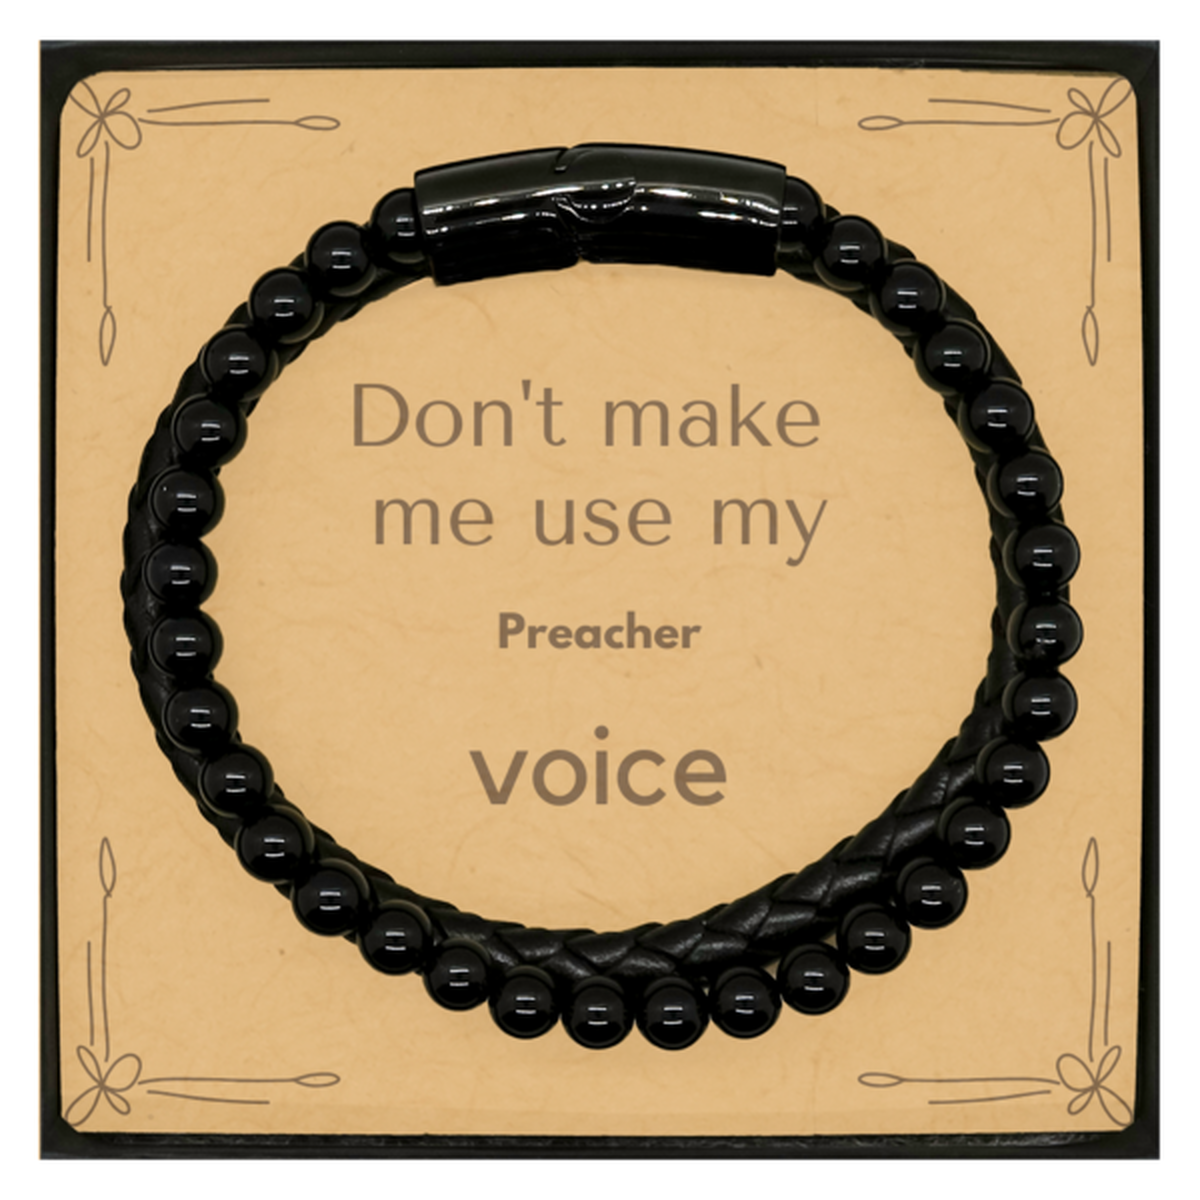 Don't make me use my Preacher voice, Sarcasm Preacher Card Gifts, Christmas Preacher Stone Leather Bracelets Birthday Unique Gifts For Preacher Coworkers, Men, Women, Colleague, Friends